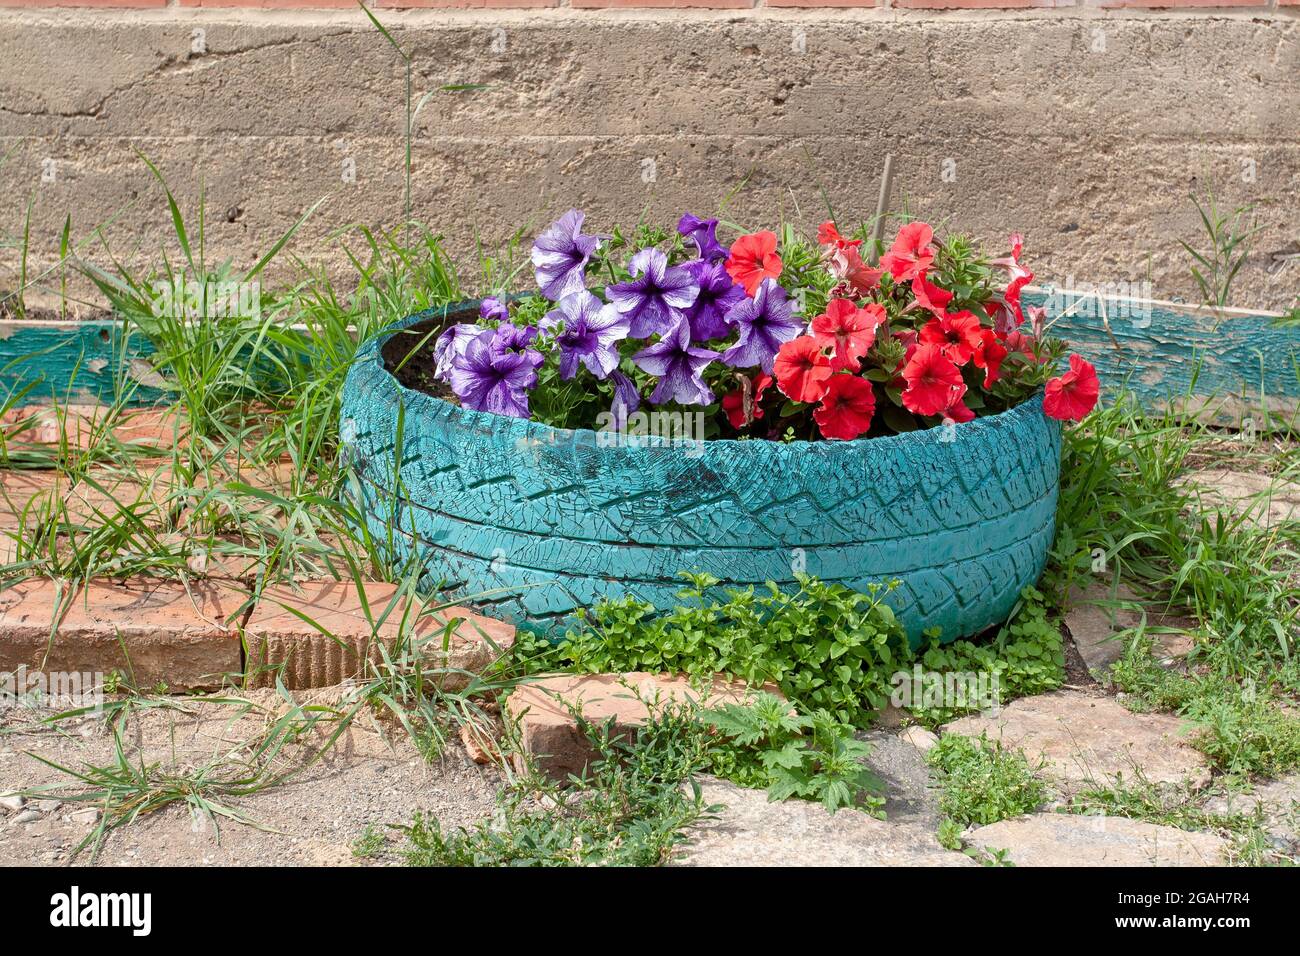 Petunia flower bed made in old car tire. Horizontal image. Stock Photo